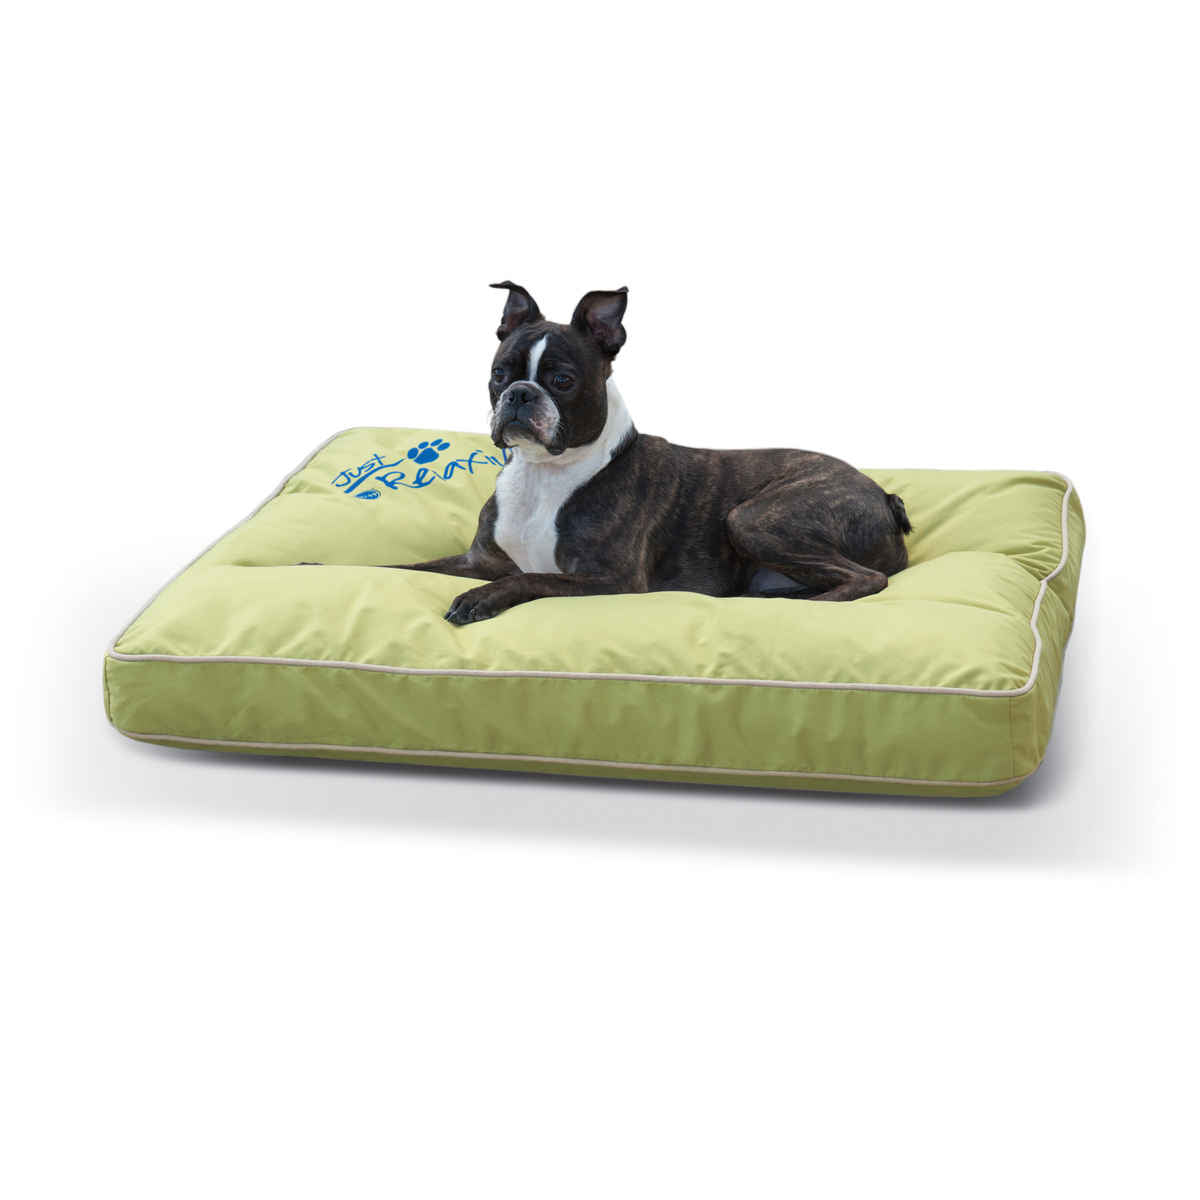 K&h Pet Products Kh7045 Just Relaxin